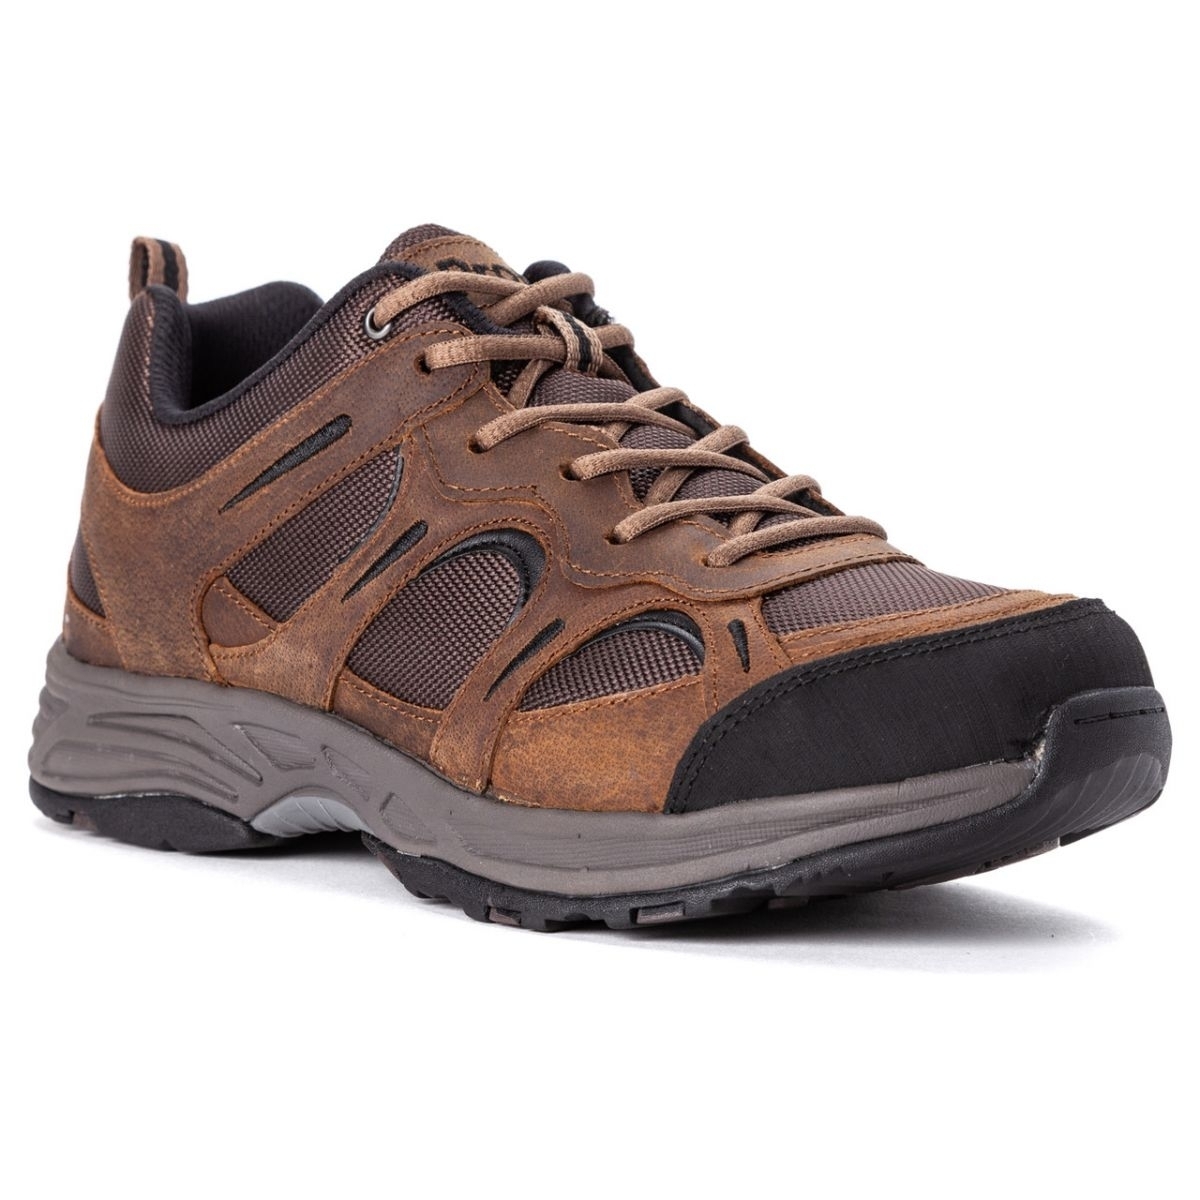 Propet Men's Connelly Hiking Shoe Brown - M5503BR BROWN - BROWN, 10.5-D